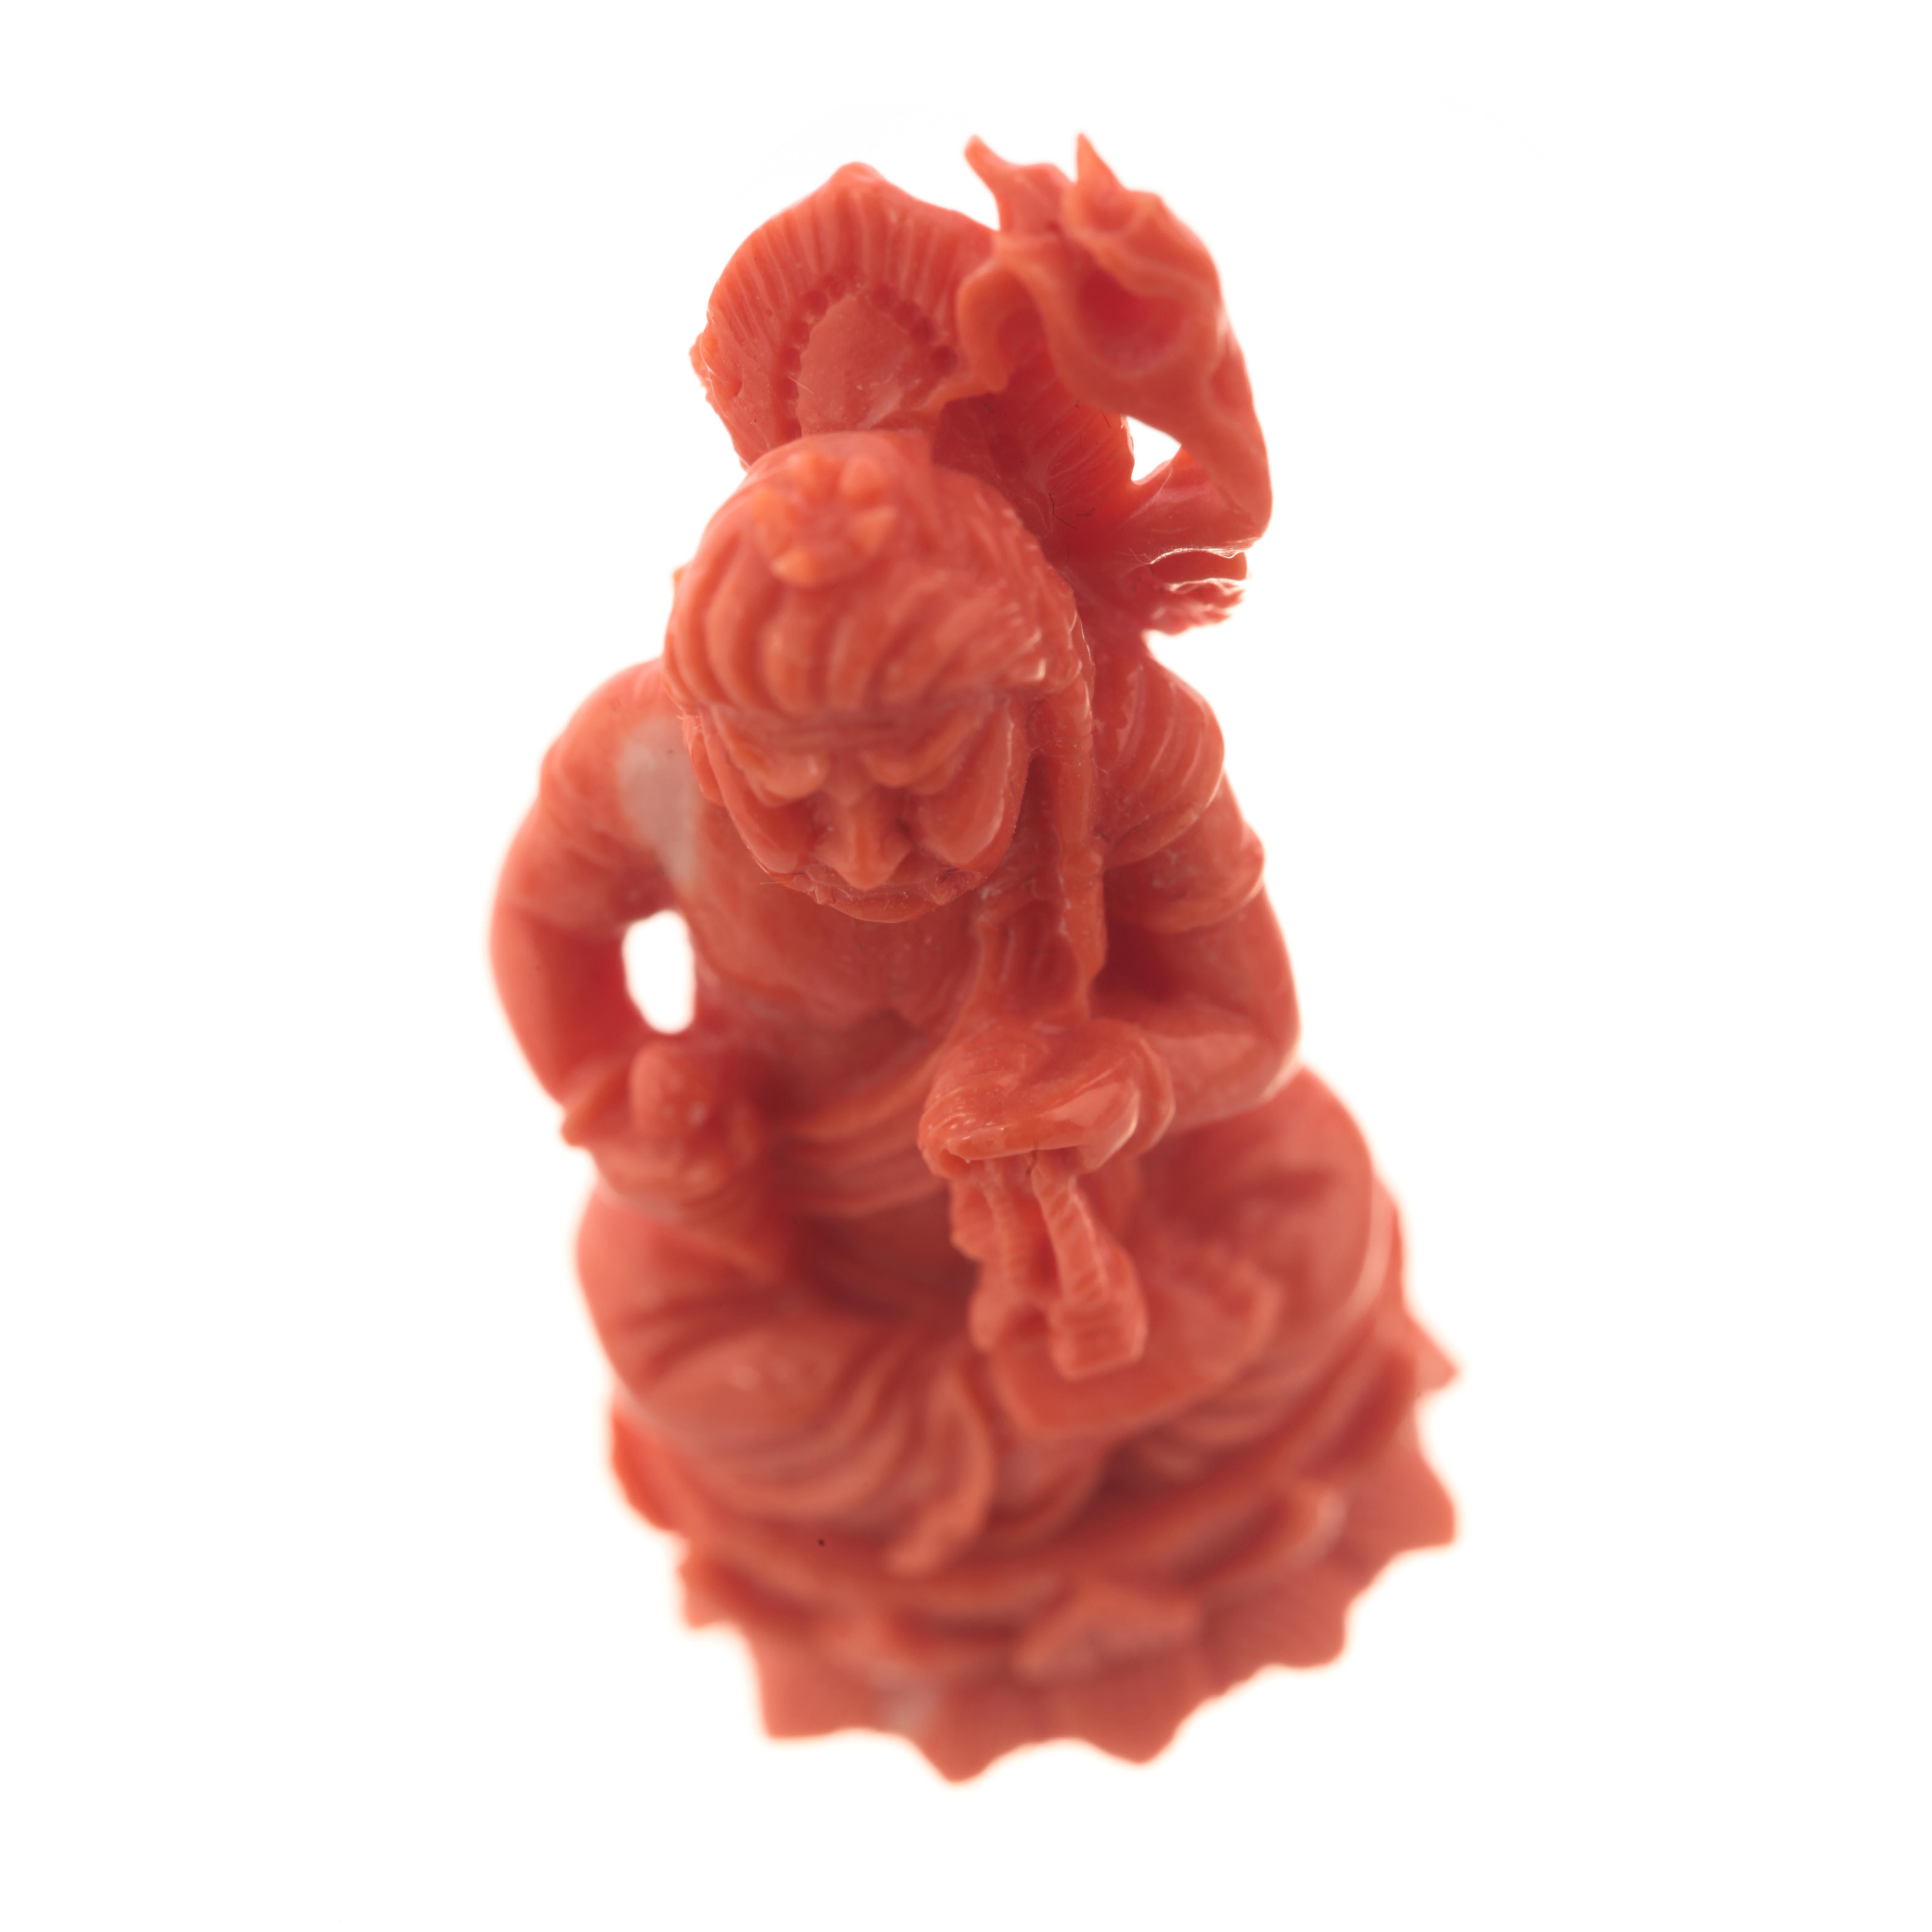 Chinese Wise Man Buddhist Carved Asian Decorative Art Statue Sculpture Natural Red Coral For Sale